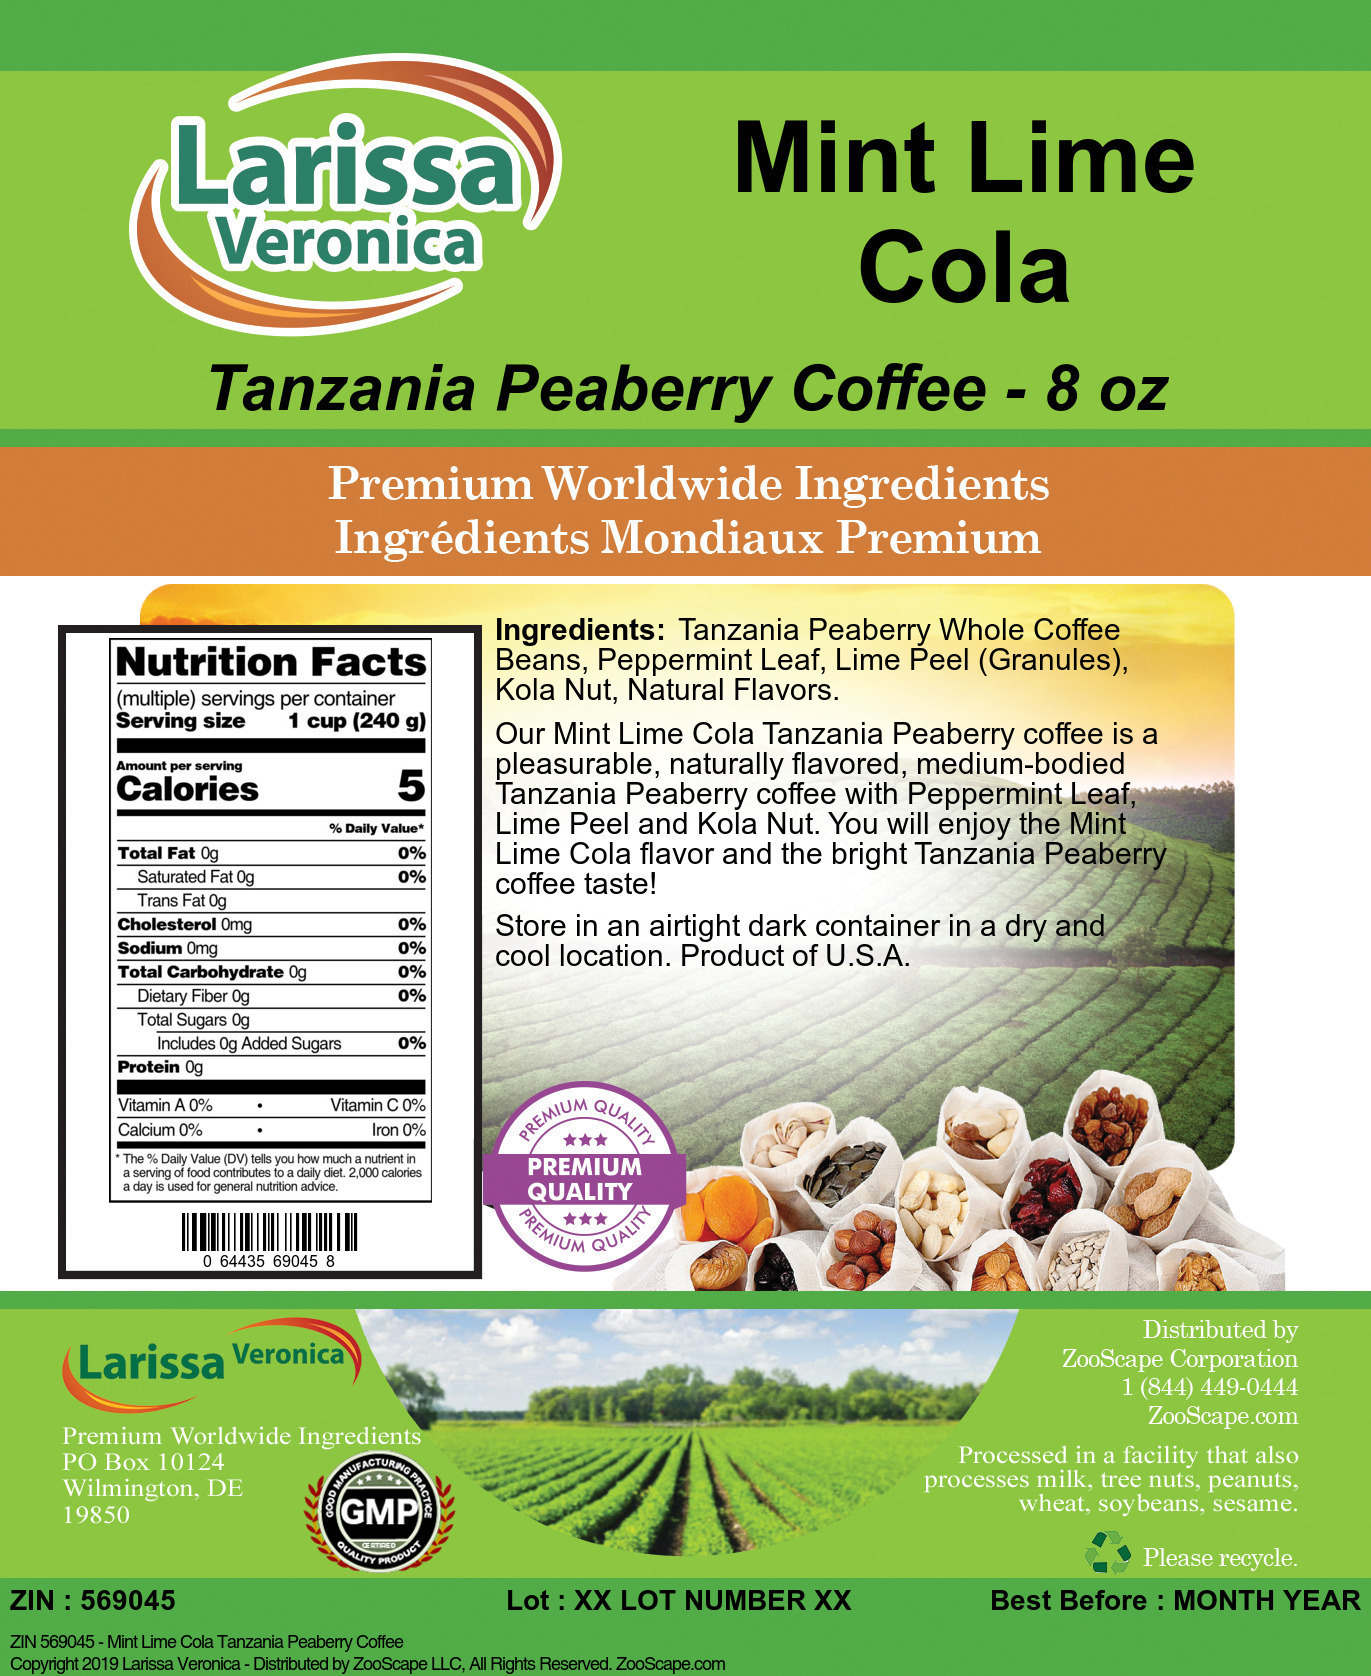 Mint Lime Cola Tanzania Peaberry Coffee - Label